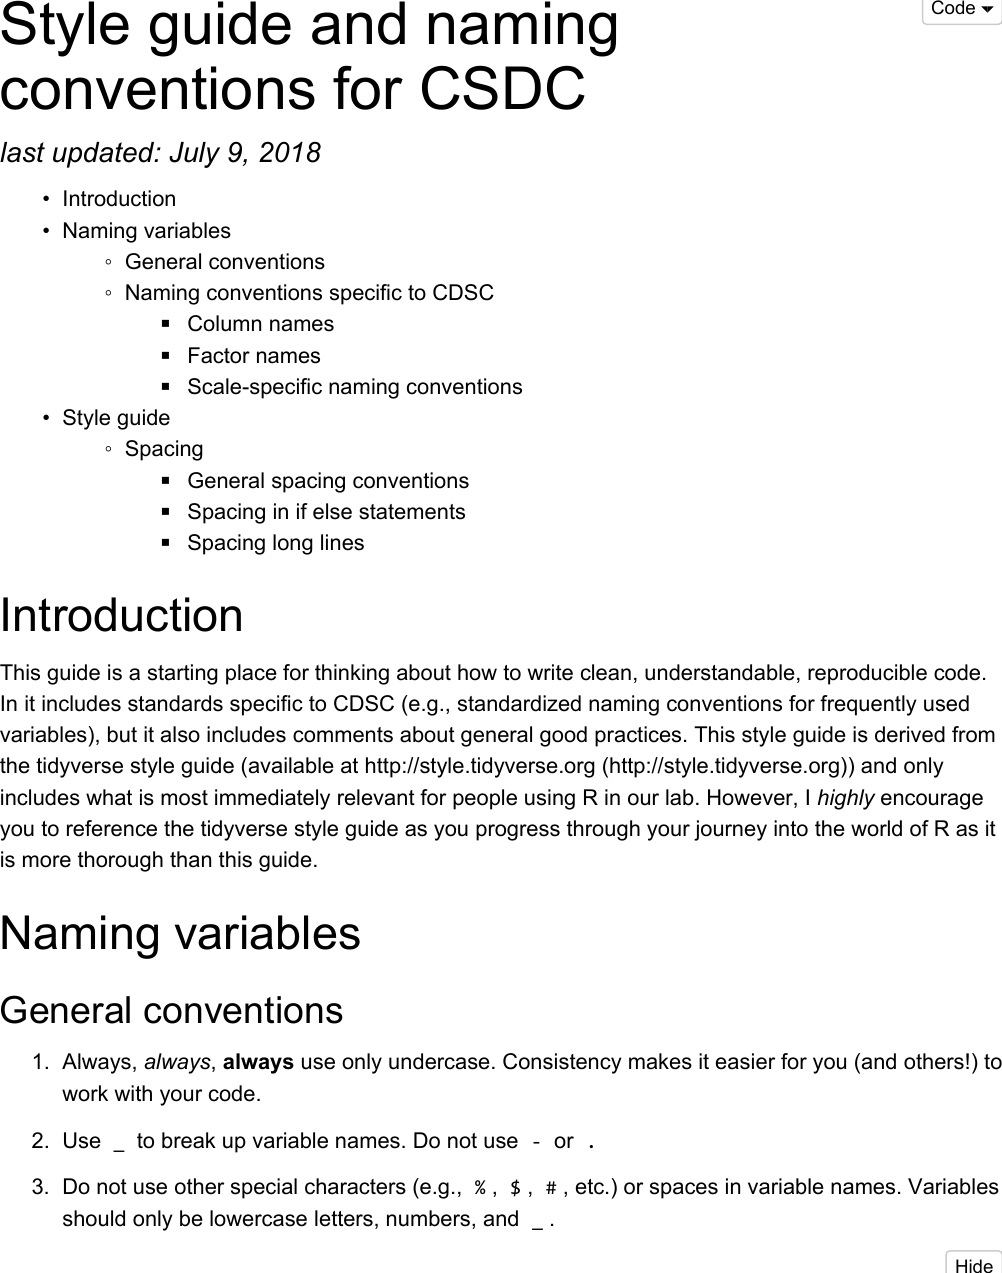 Page 1 of 8 - Style Guide And Naming Conventions For CSDC CDSC